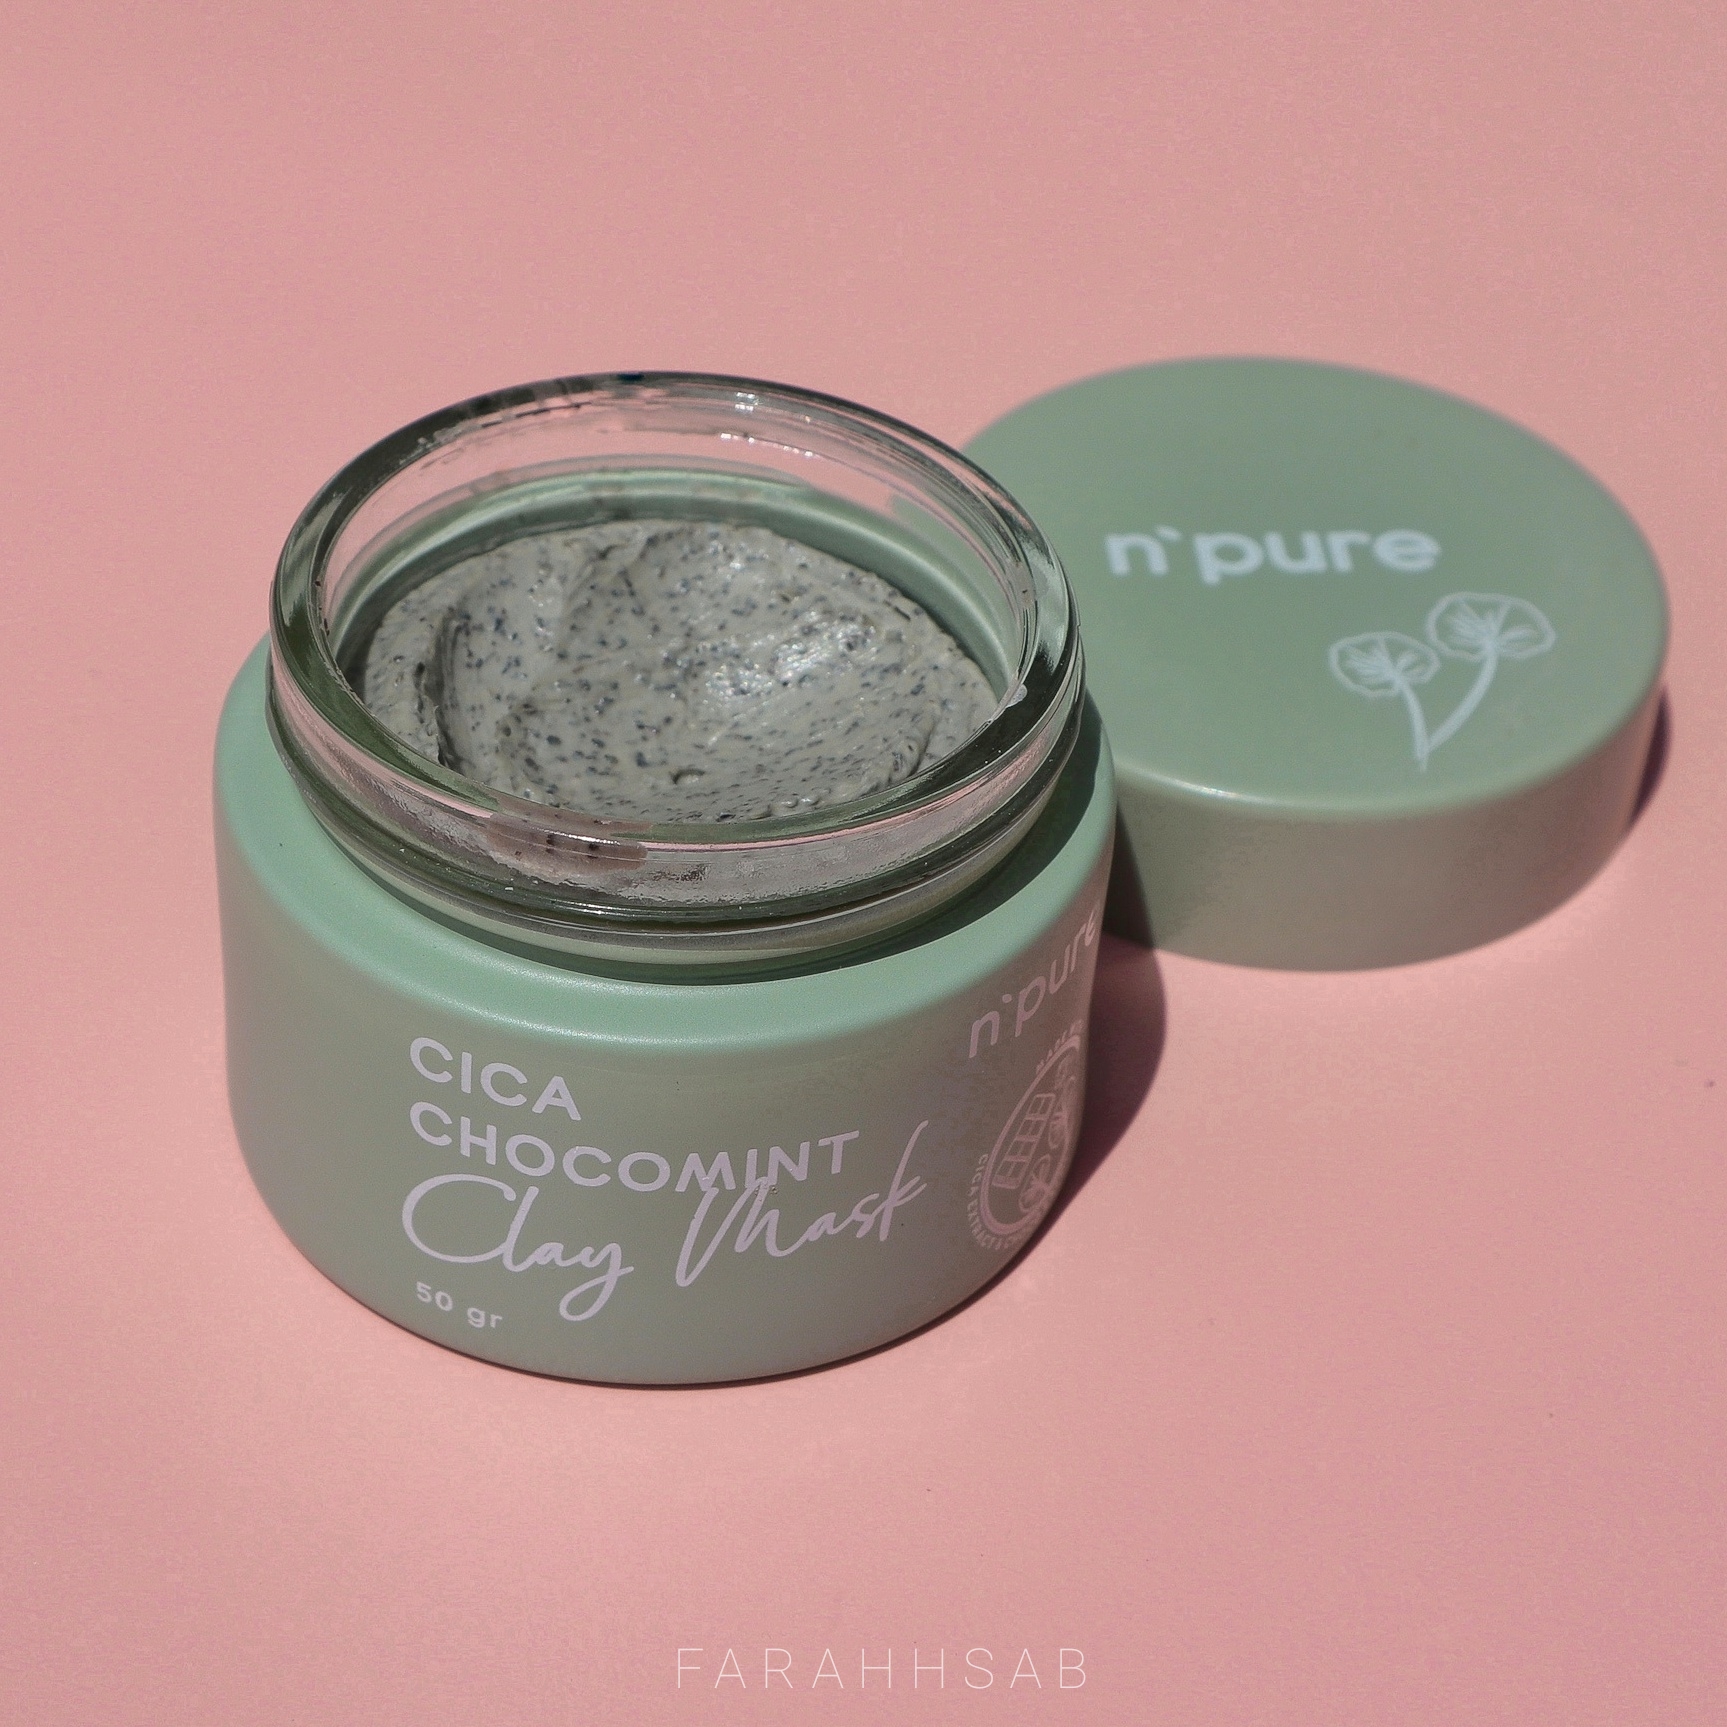 N'Pure Chocomint Clay Review (For and Pores) — Farah